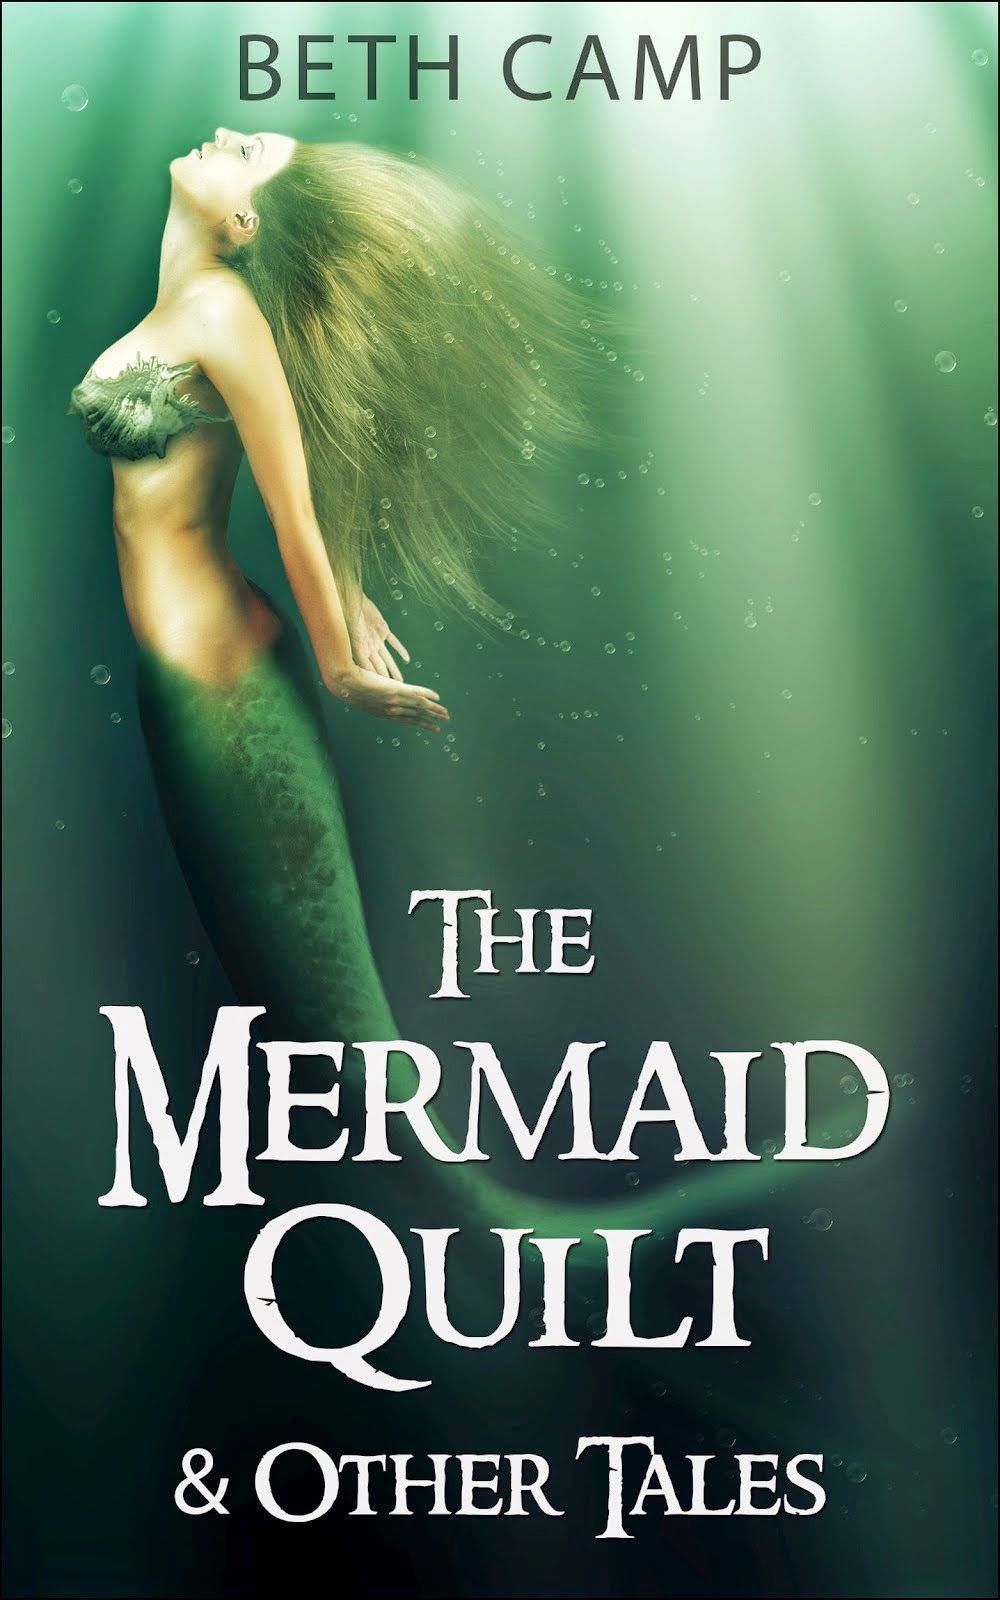 Mermaids and myths: short stories and poems for your reading pleasure